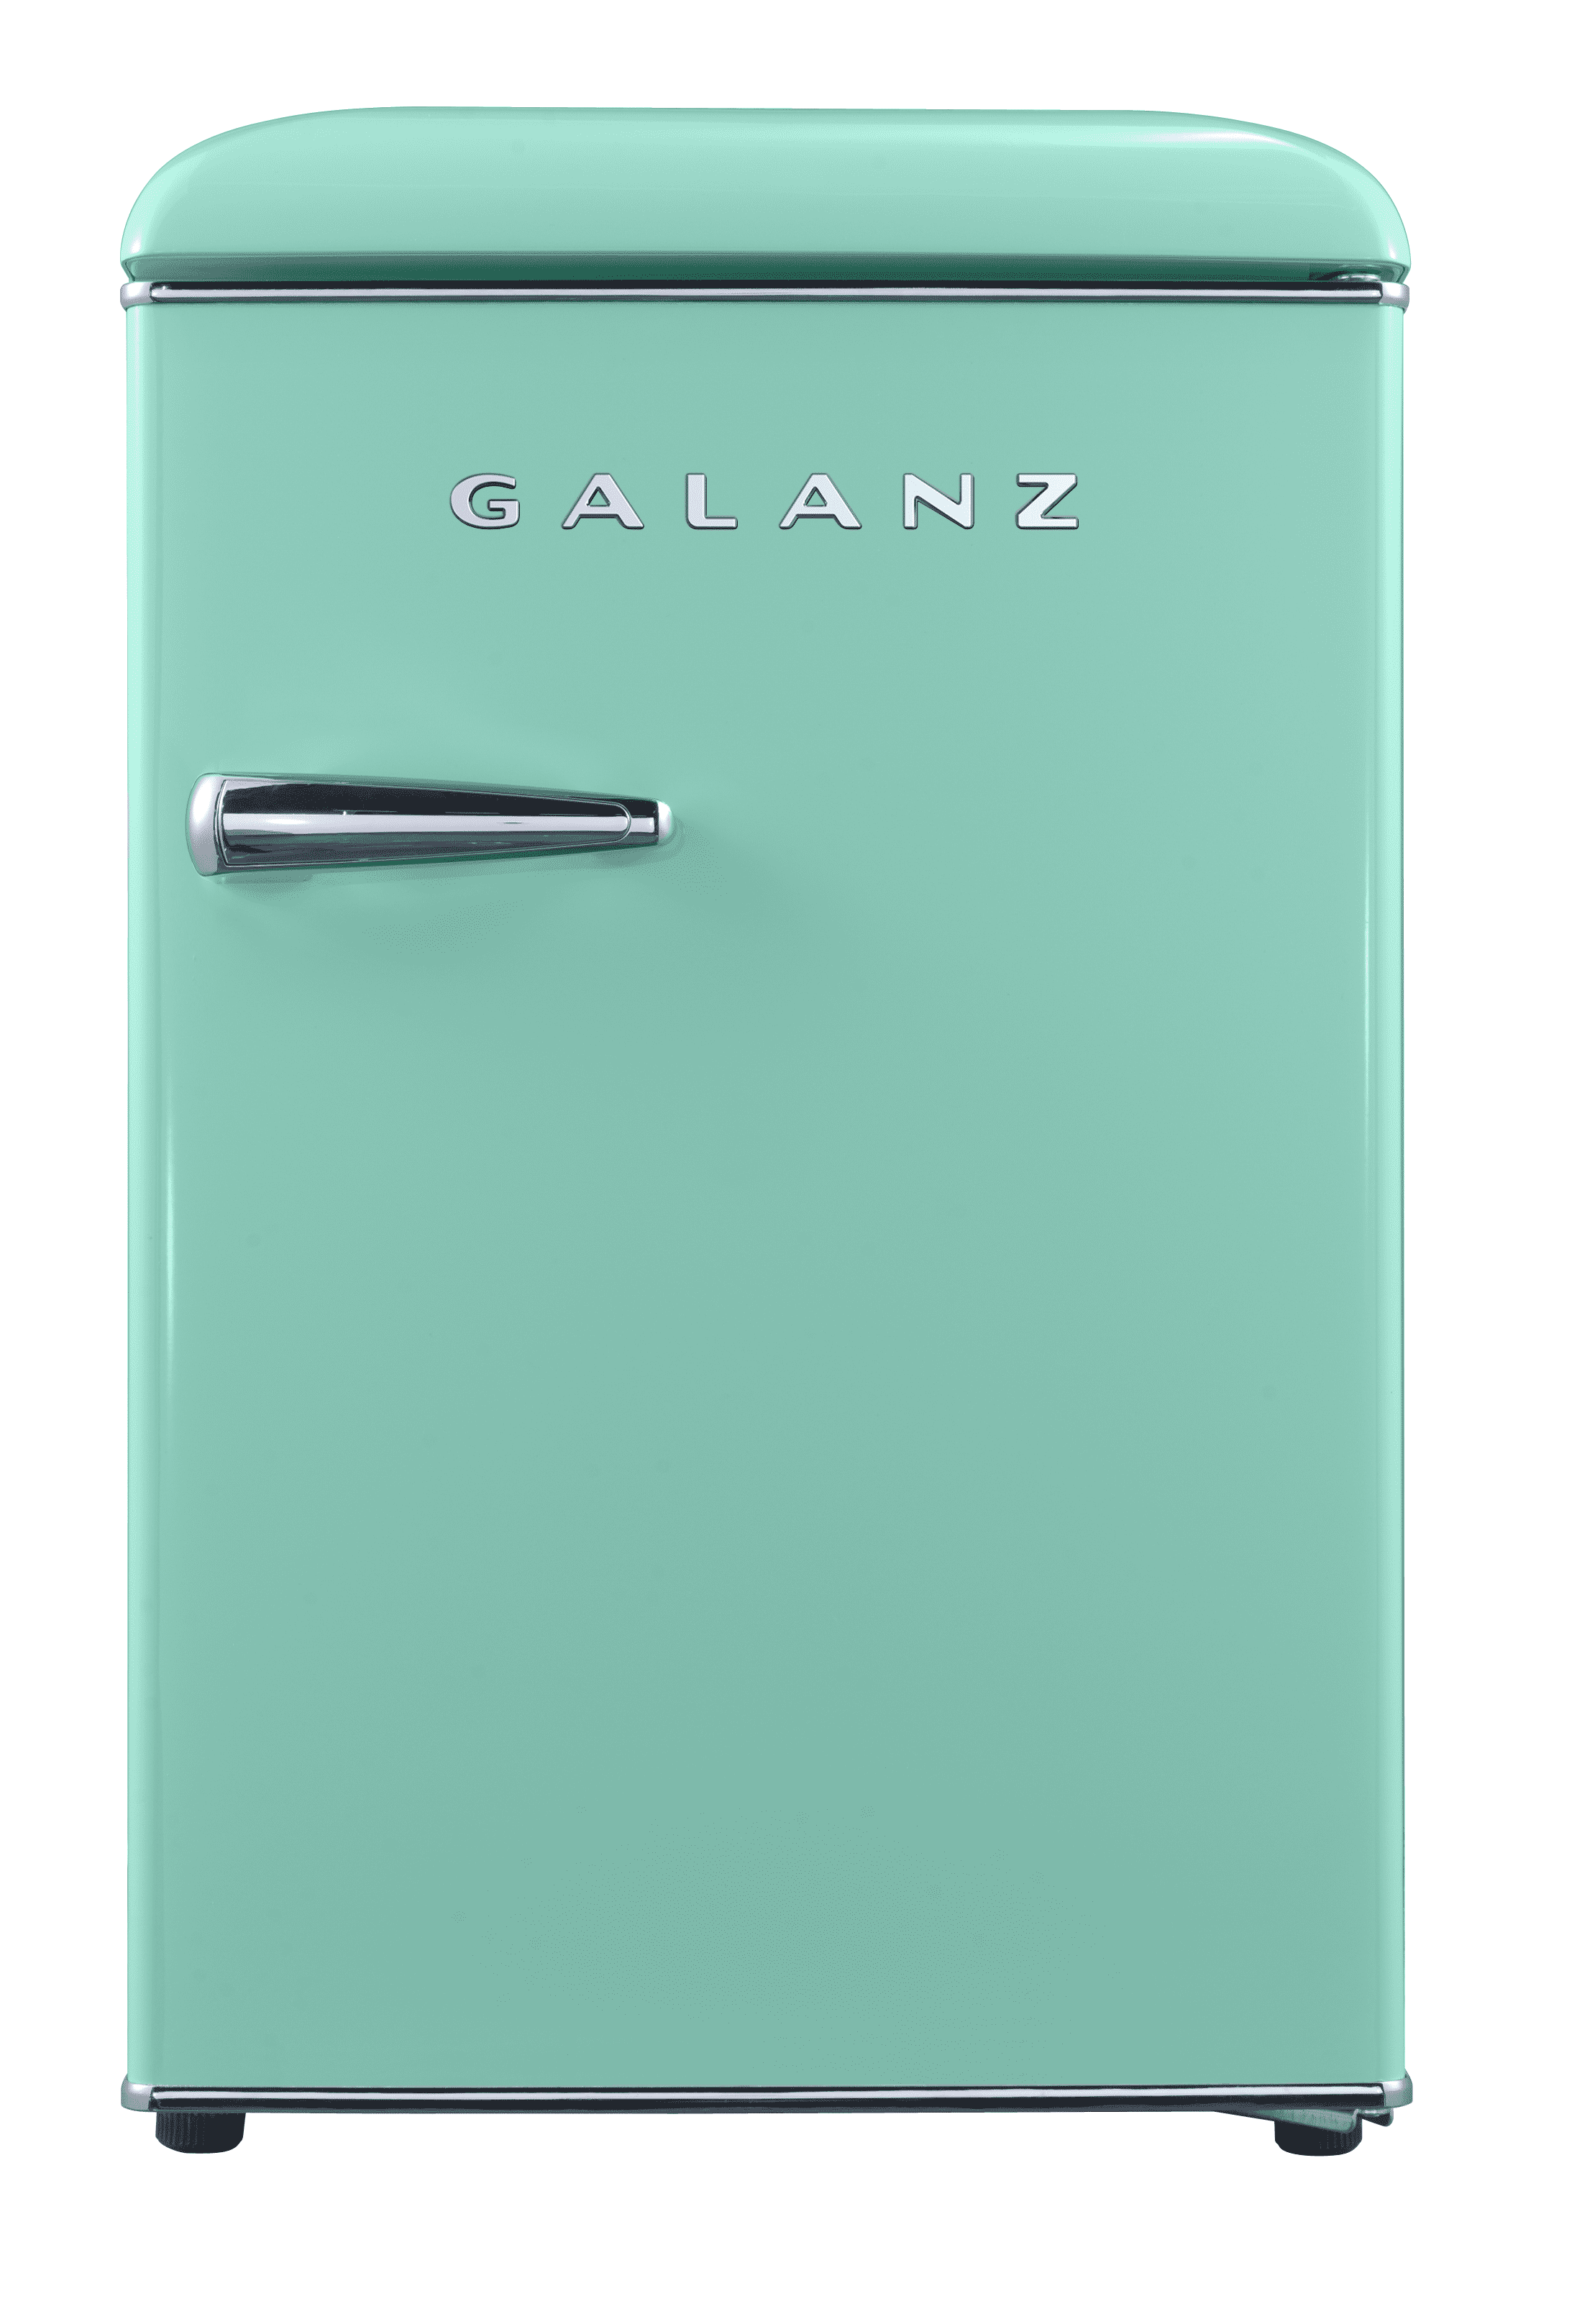 Galanz GLR25MGNR10 2.5 Cu.ft Single Door Retro Compact Fridge with ...